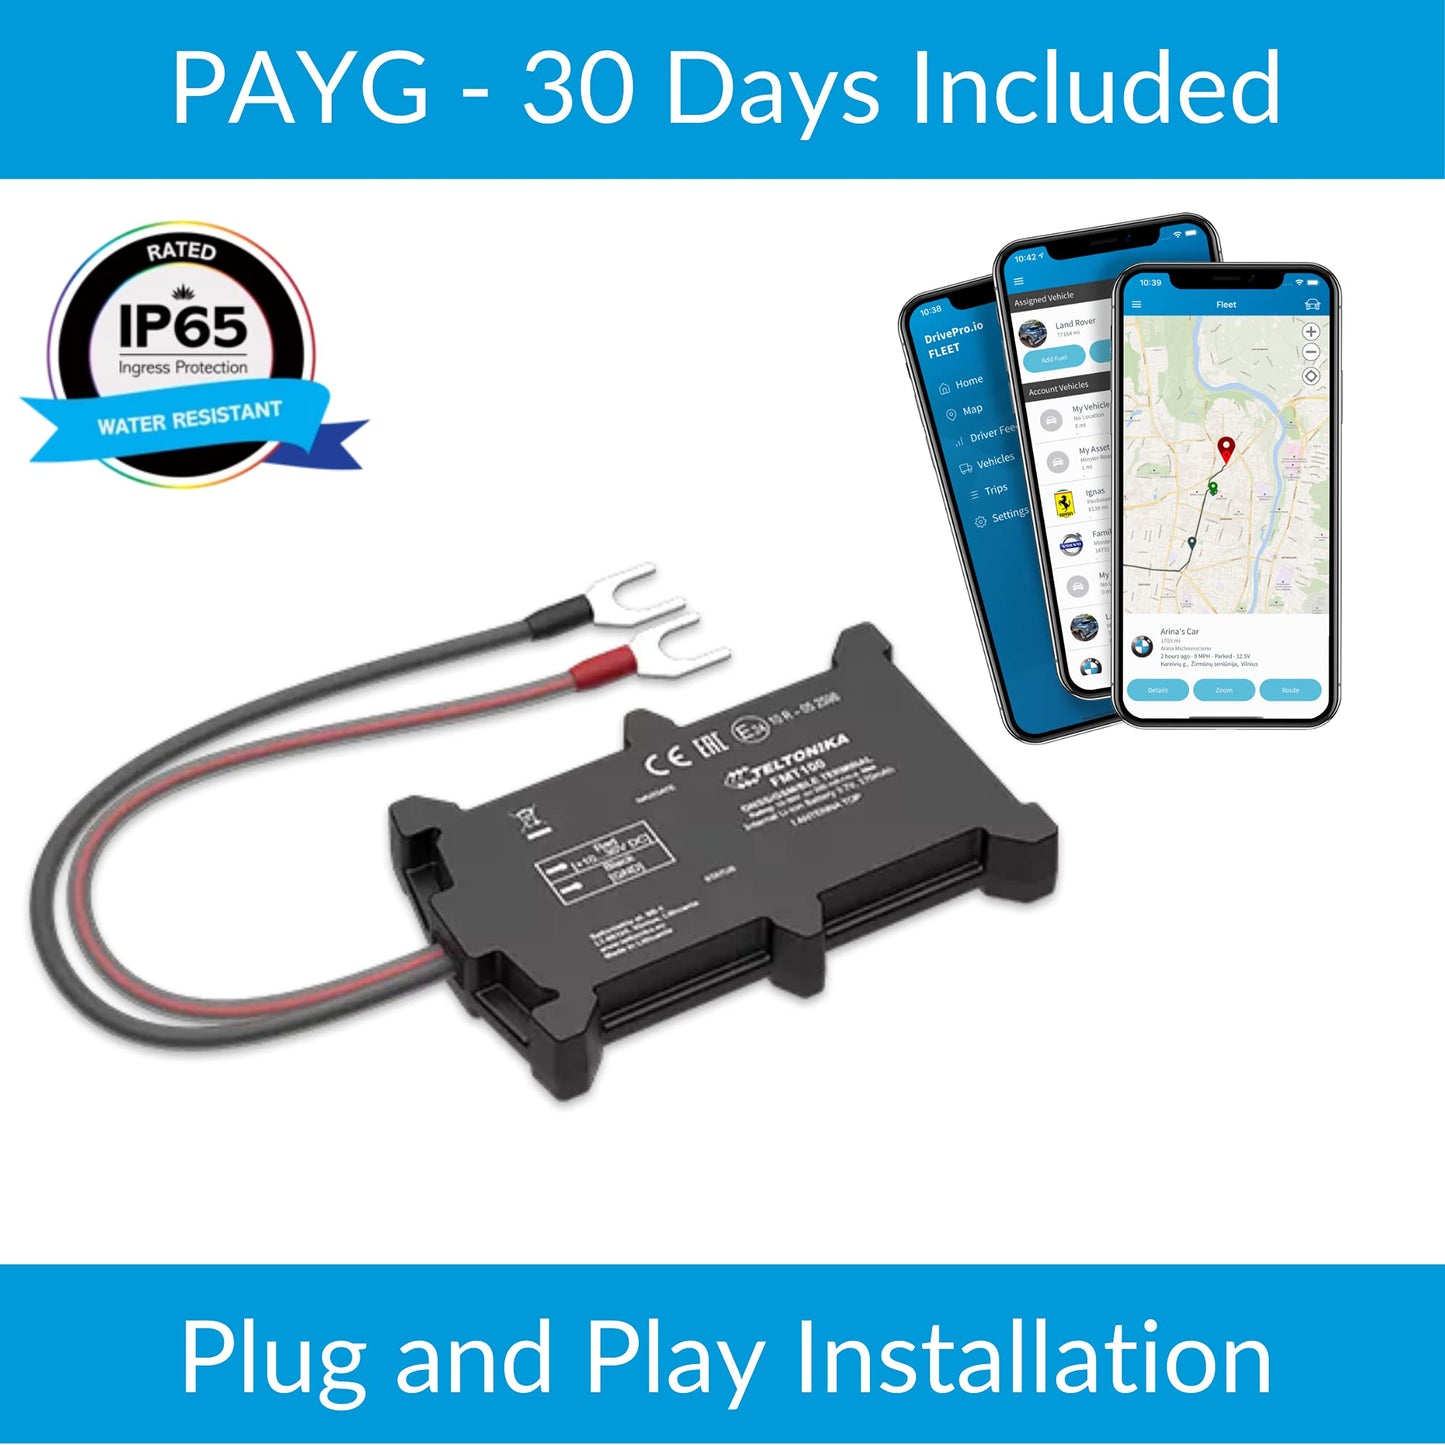 DrivePro FMT100 Self Install GPS Tracker - Pay as You Go